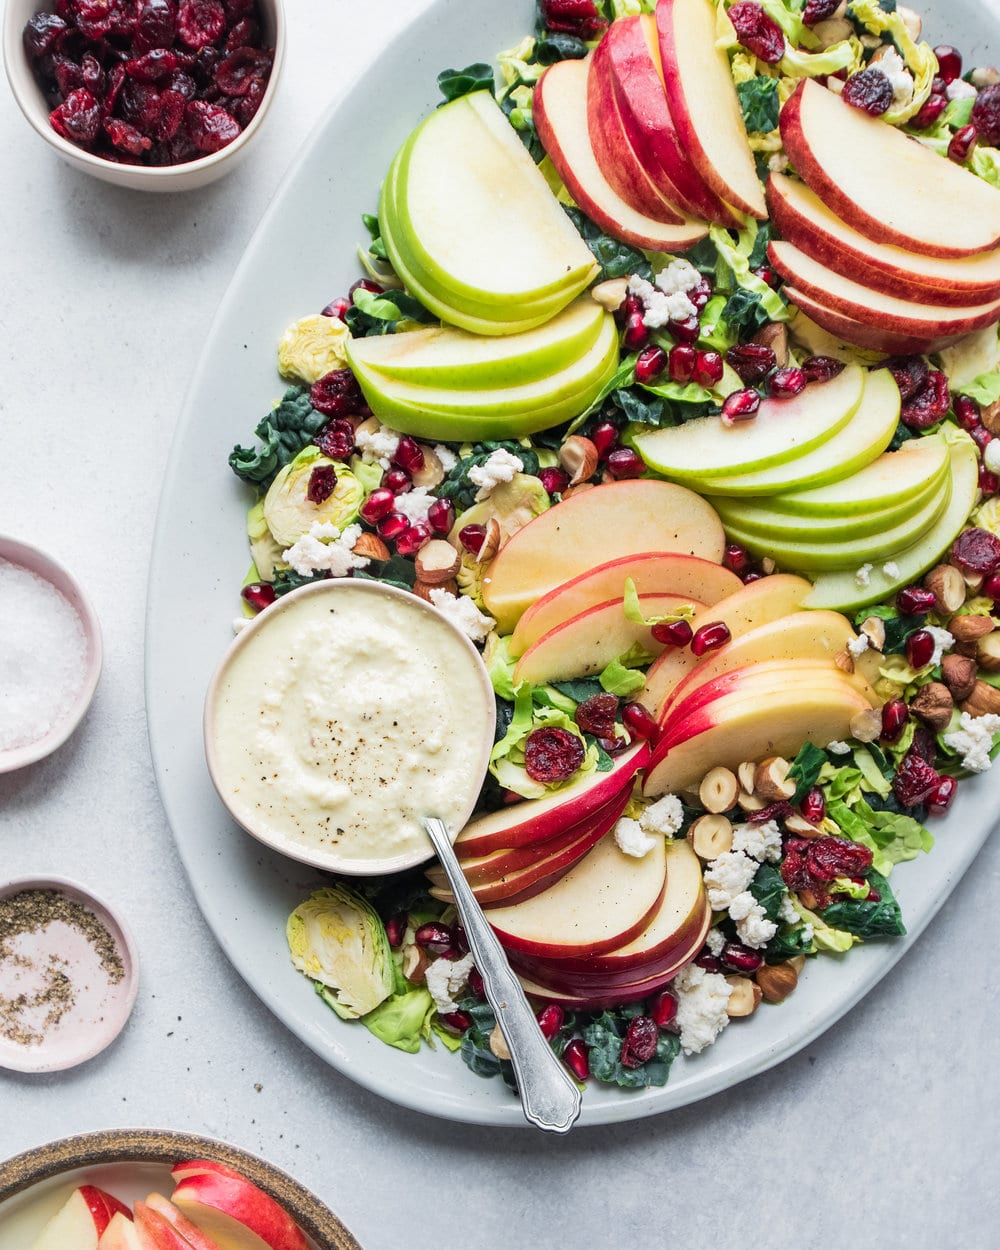 Kale salad with sliced apples, pomegranates, avocado and dressing on a large white platter.